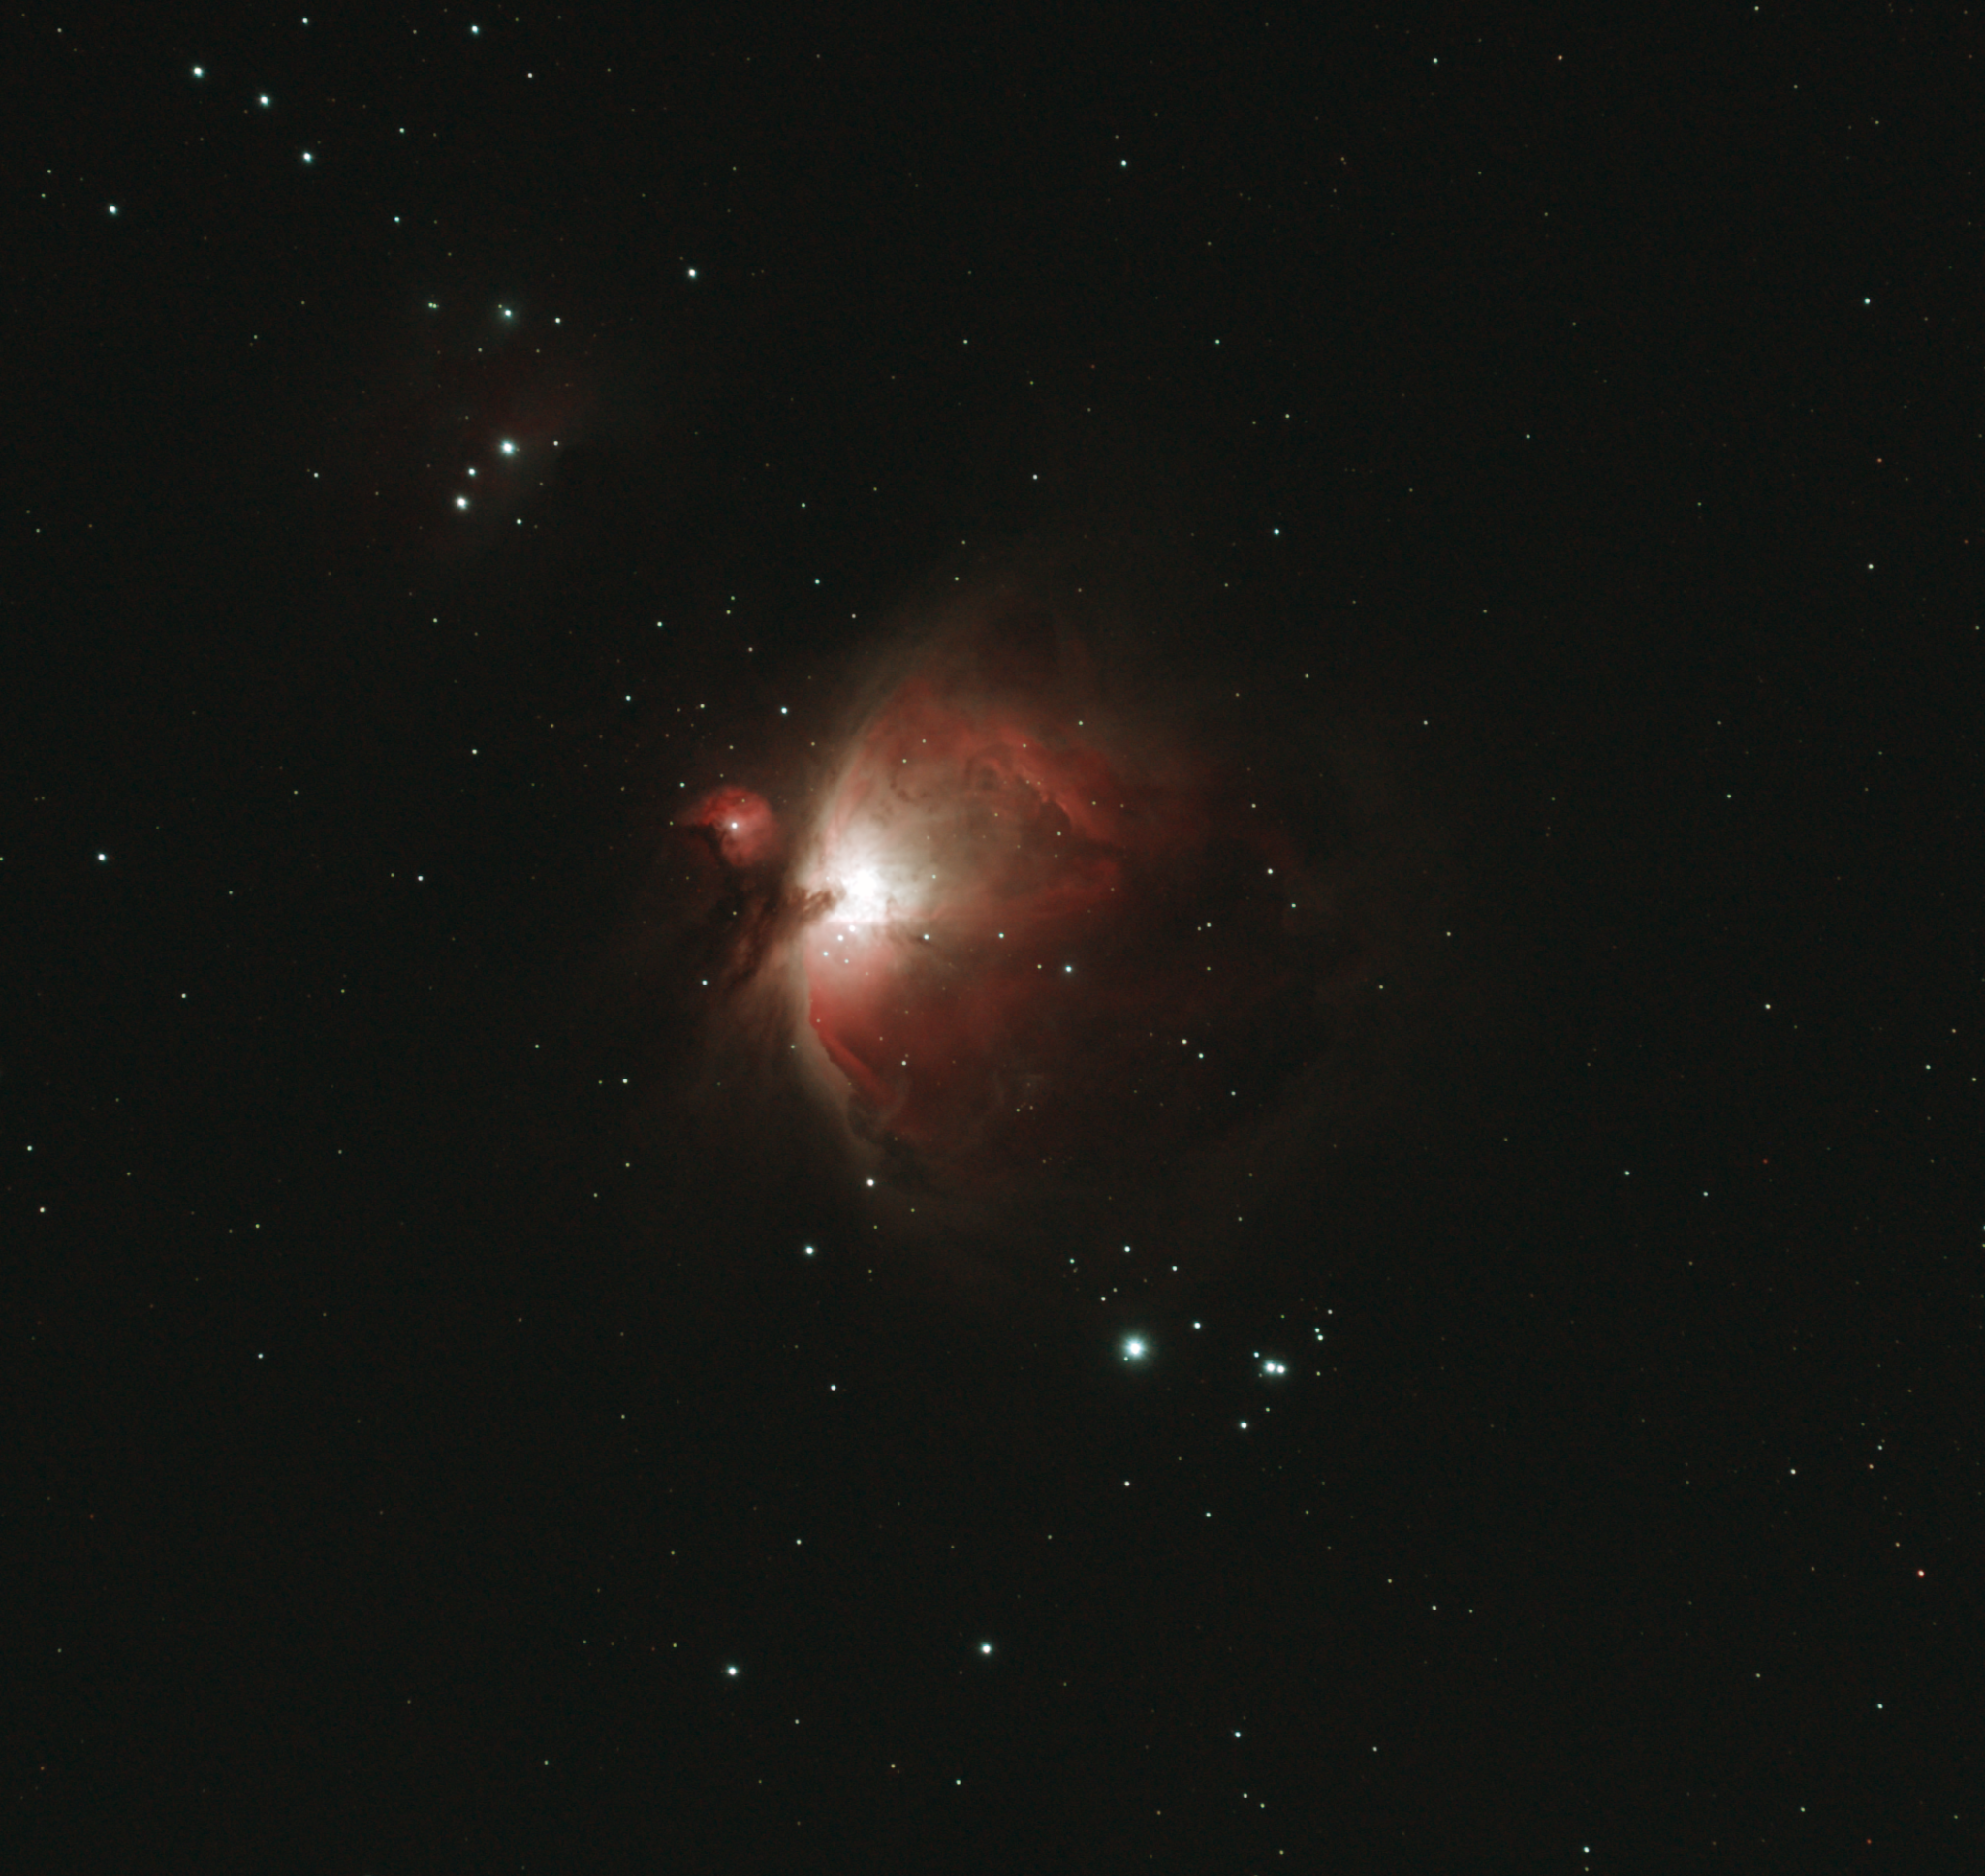 Orion Nebula, taken using Sony a6400. 6 x 4-minute exposures